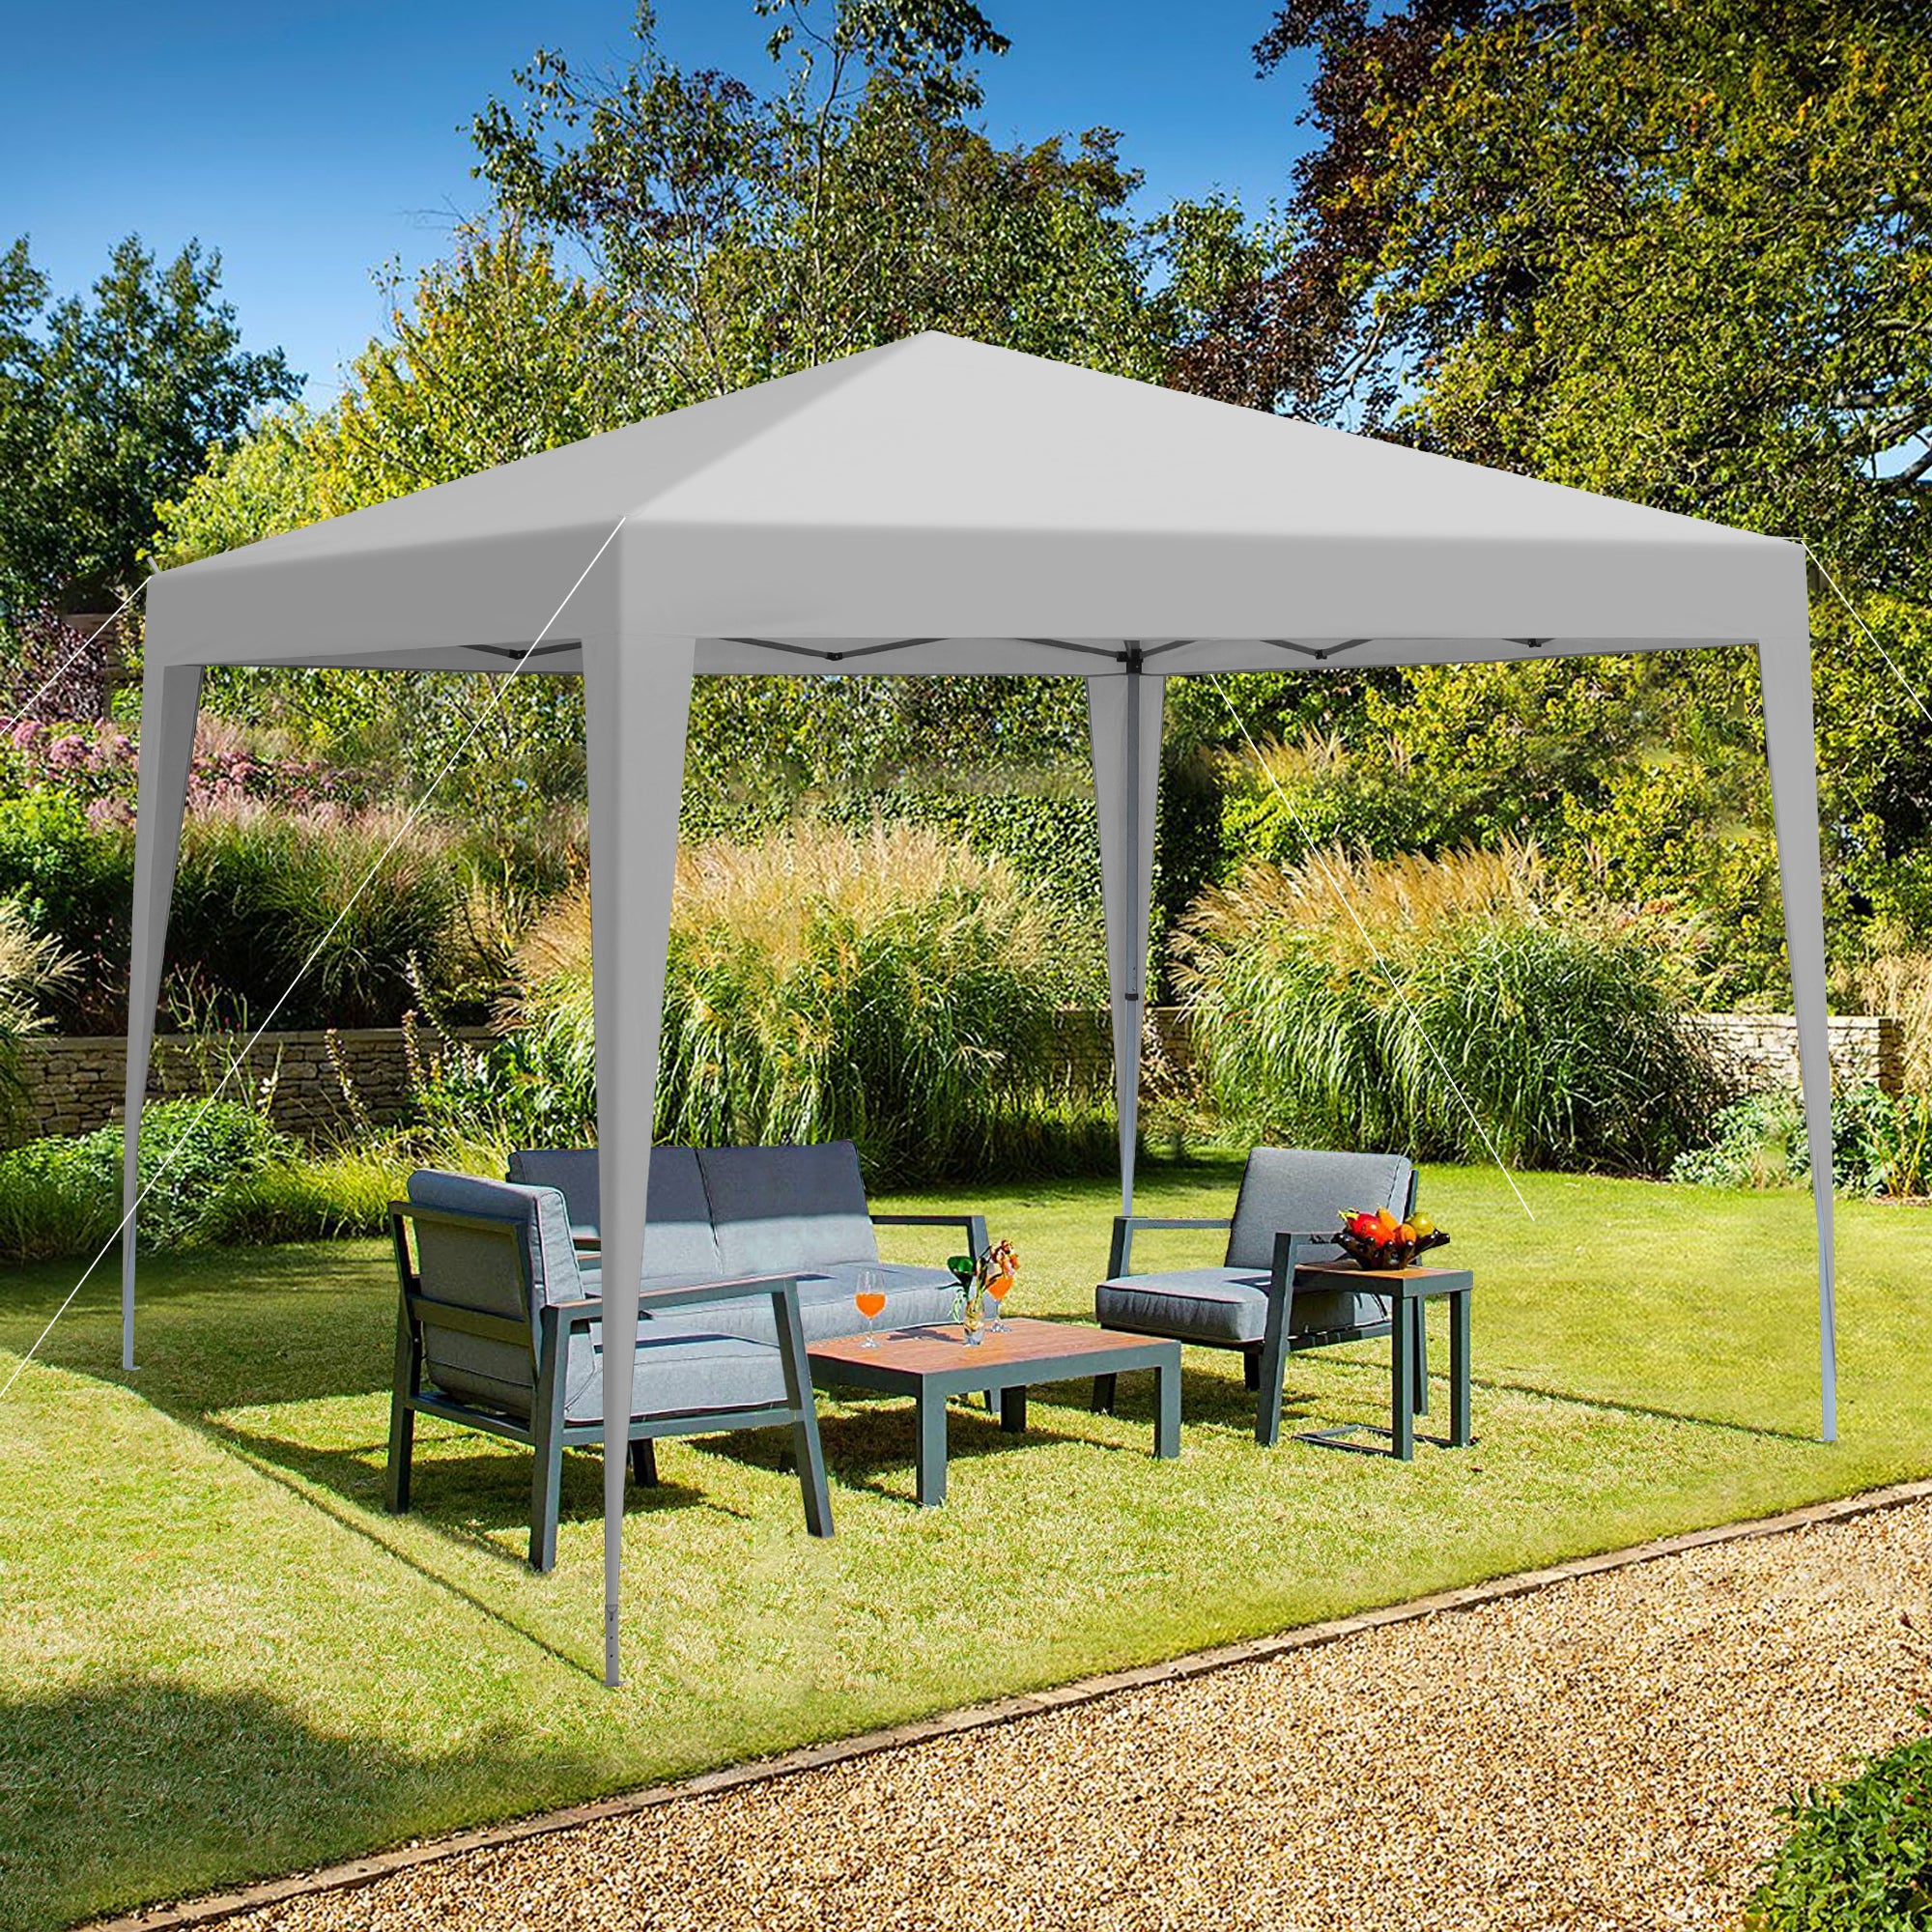 Outdoor 10x 10Ft Pop Up Gazebo Canopy Tent with 4pcs grey-metal